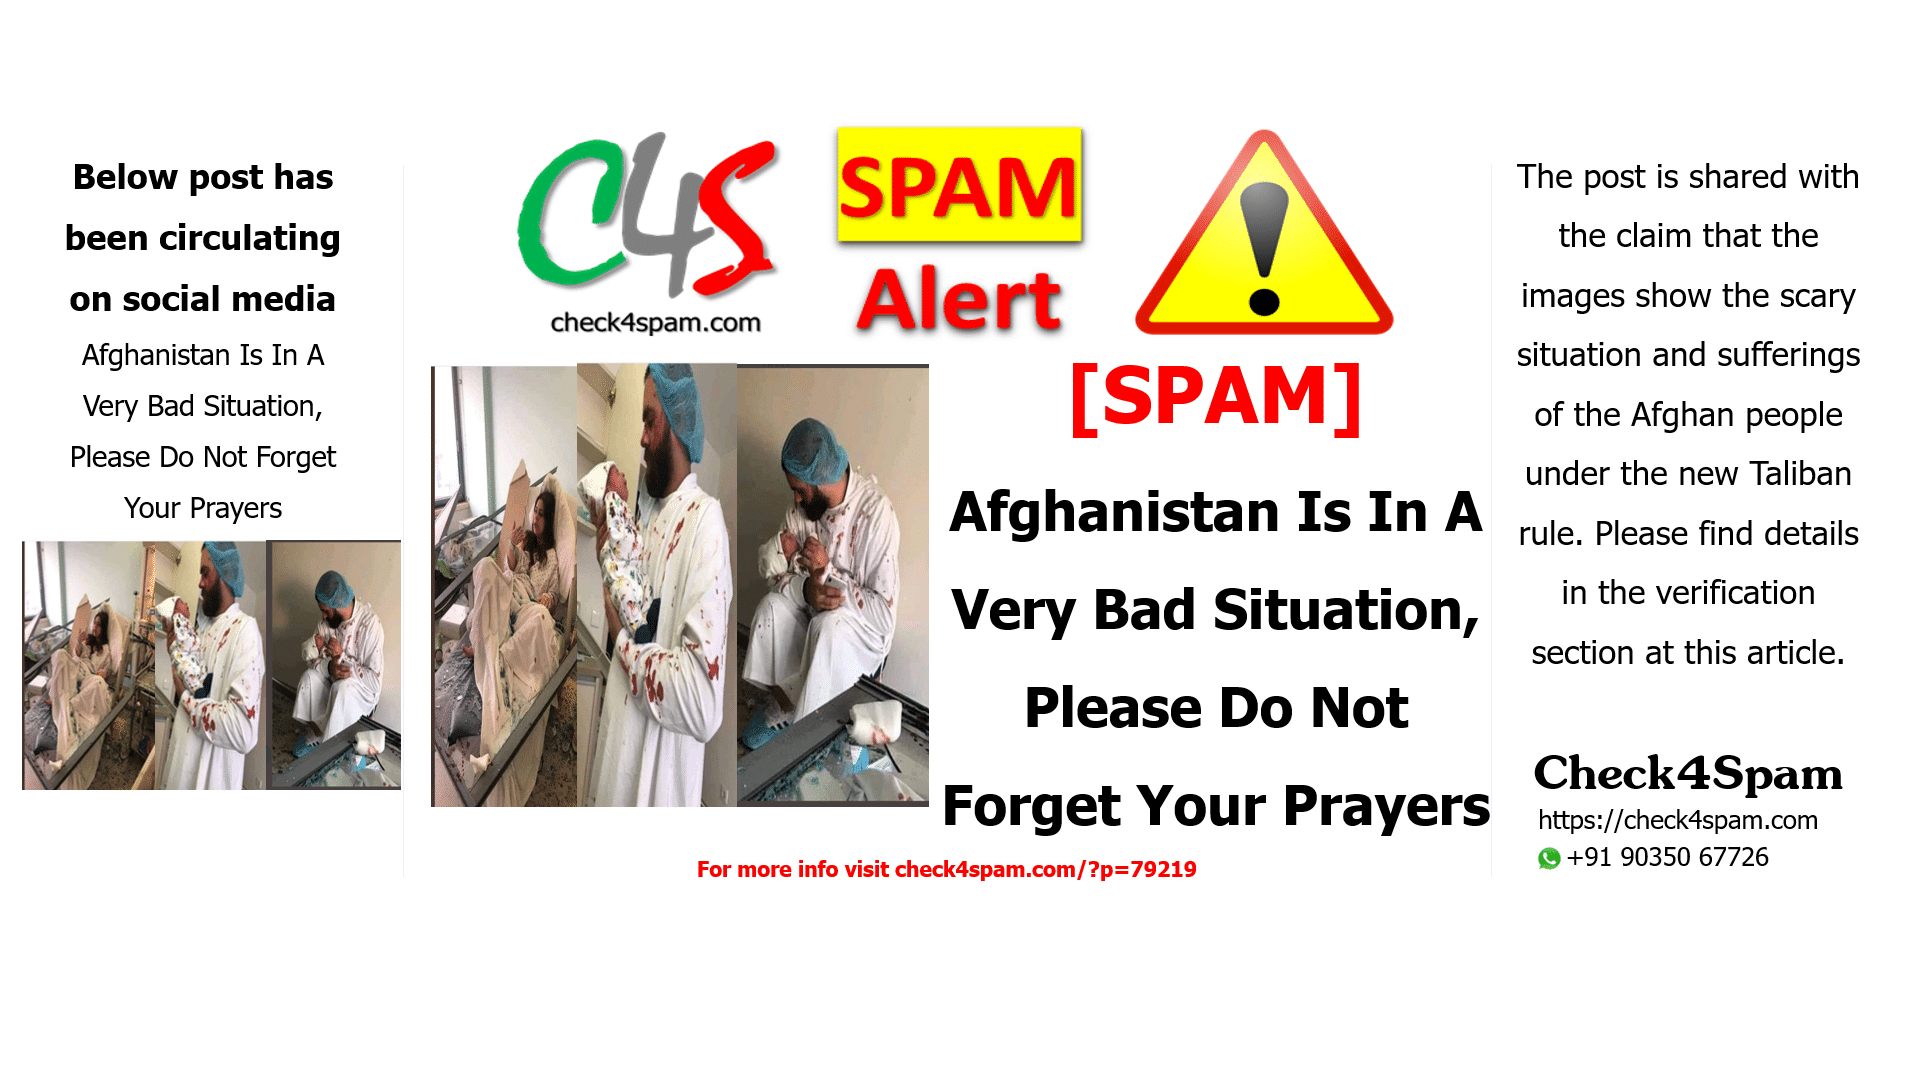 Afghanistan Is In A Very Bad Situation, Please Do Not Forget Your Prayers